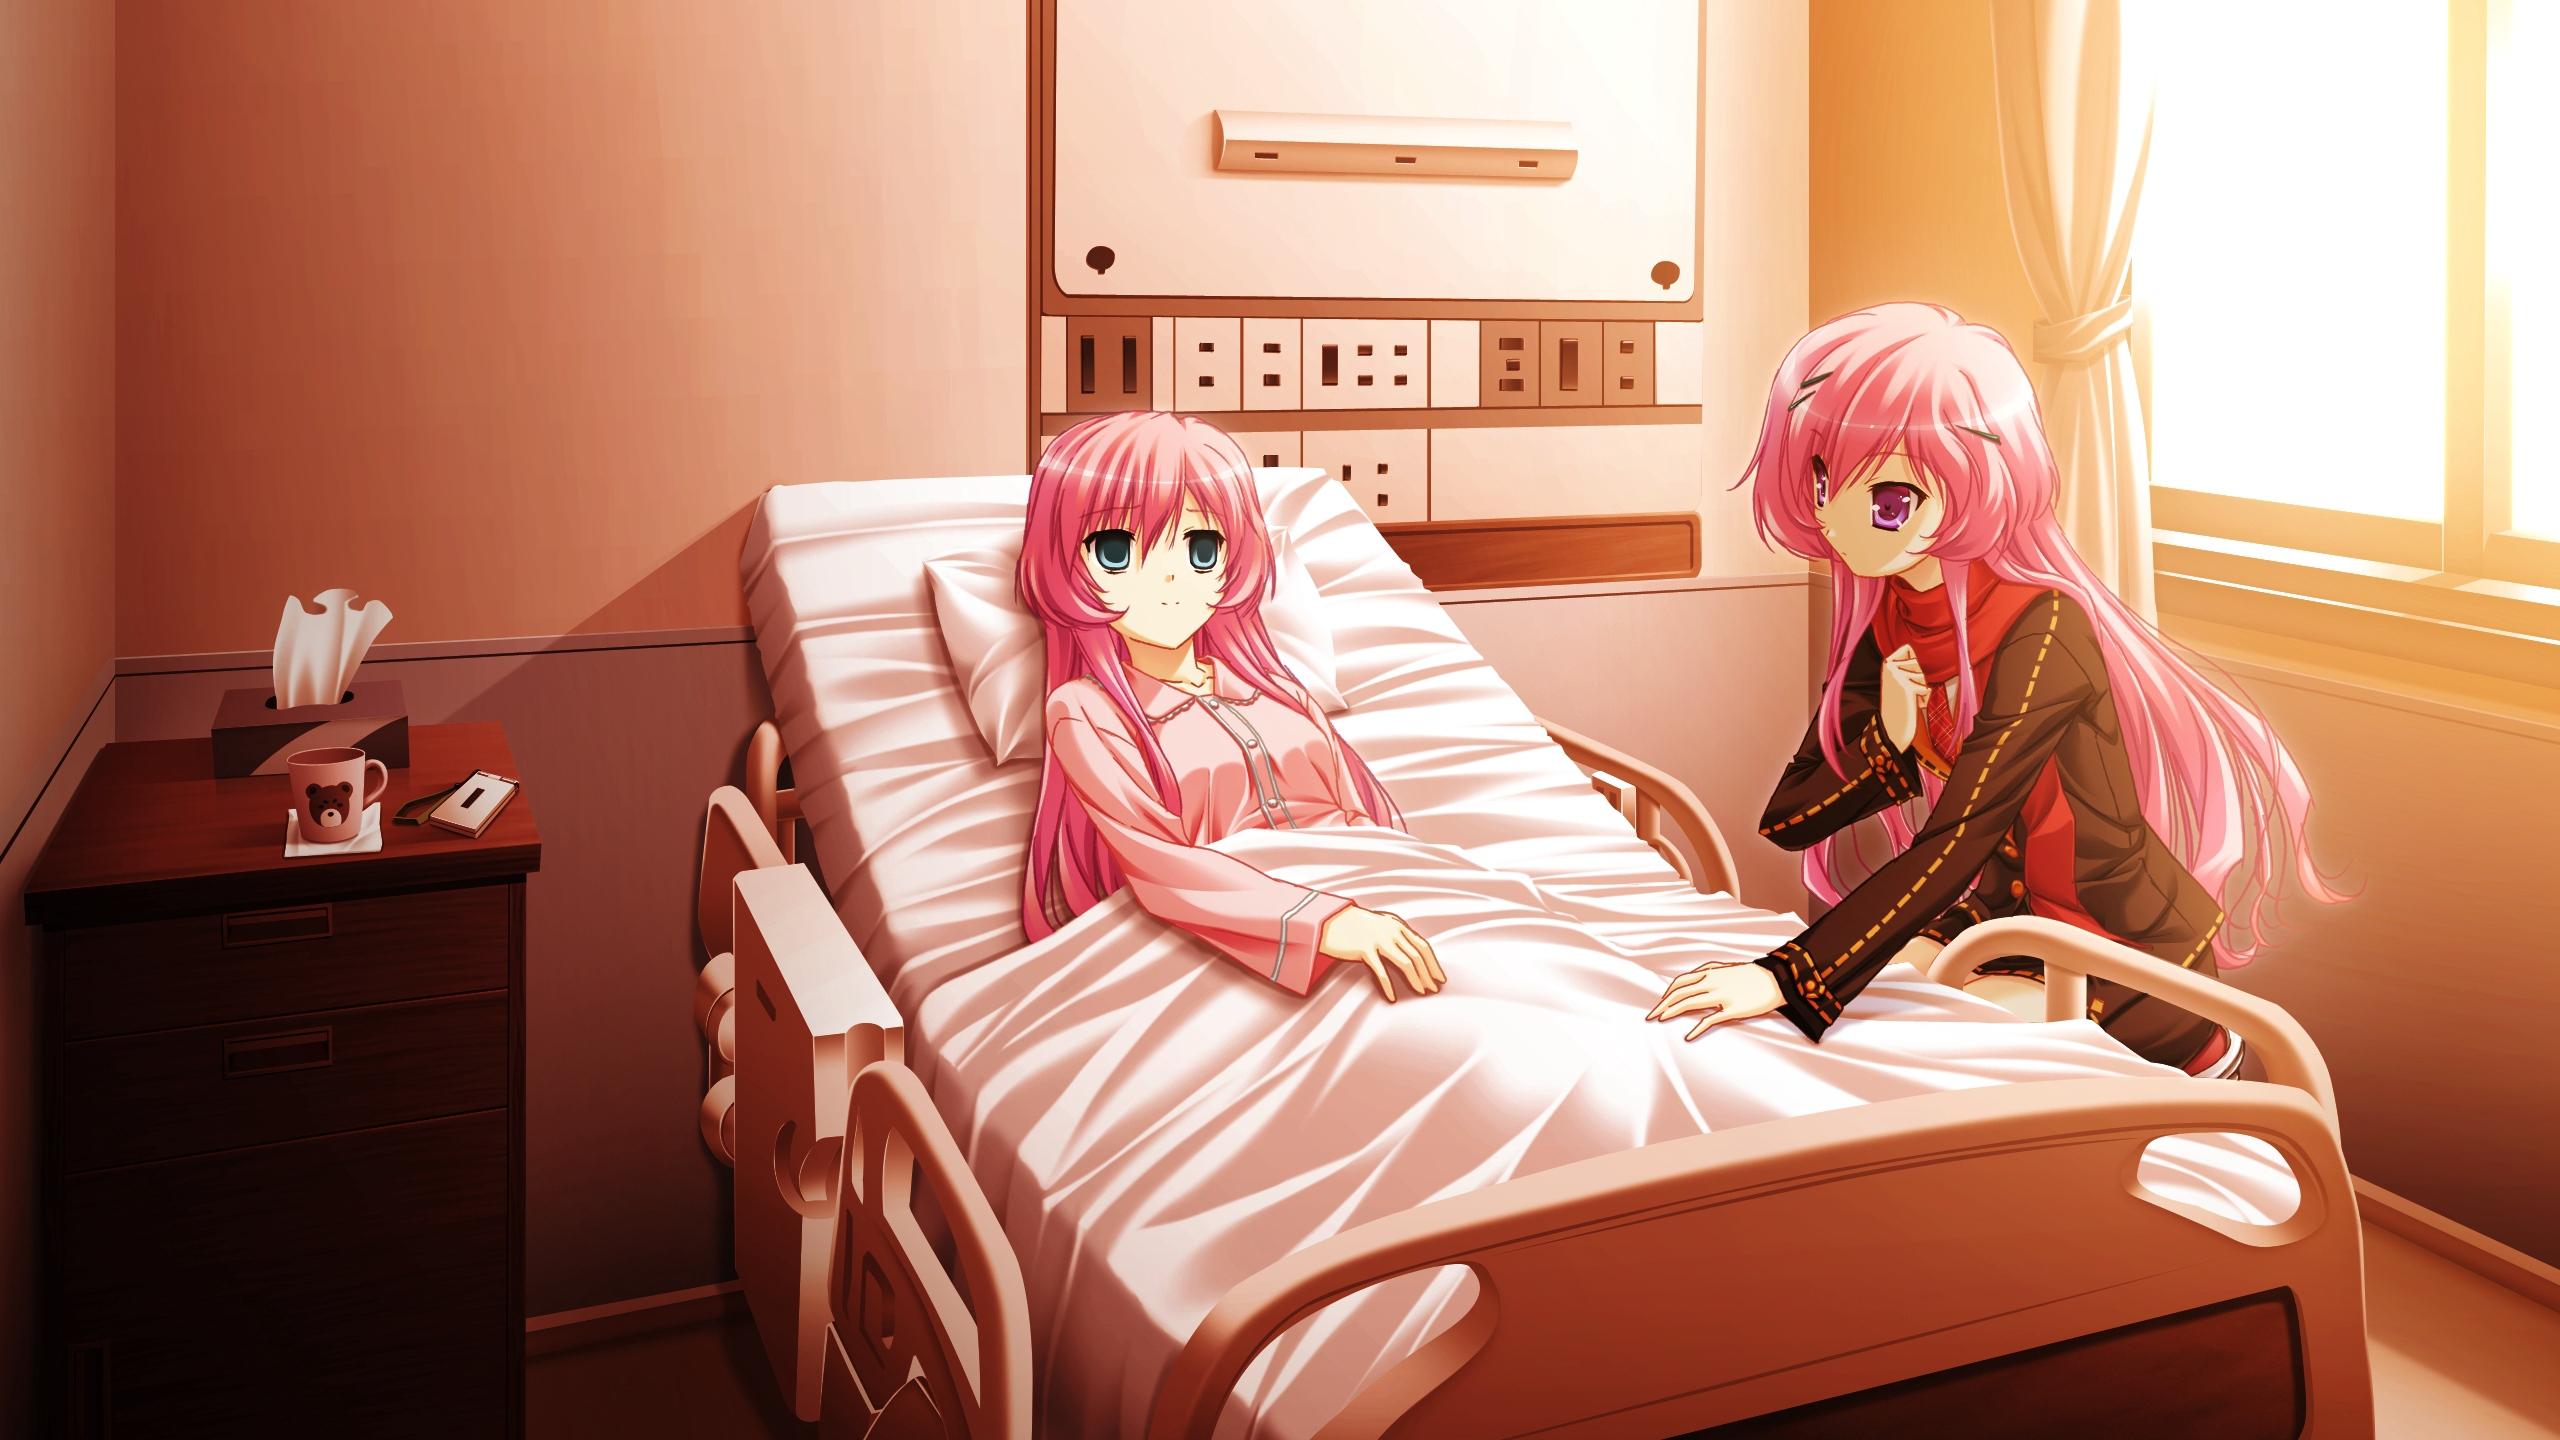 Download wallpaper 2560x1440 girl, hospital, bed, care